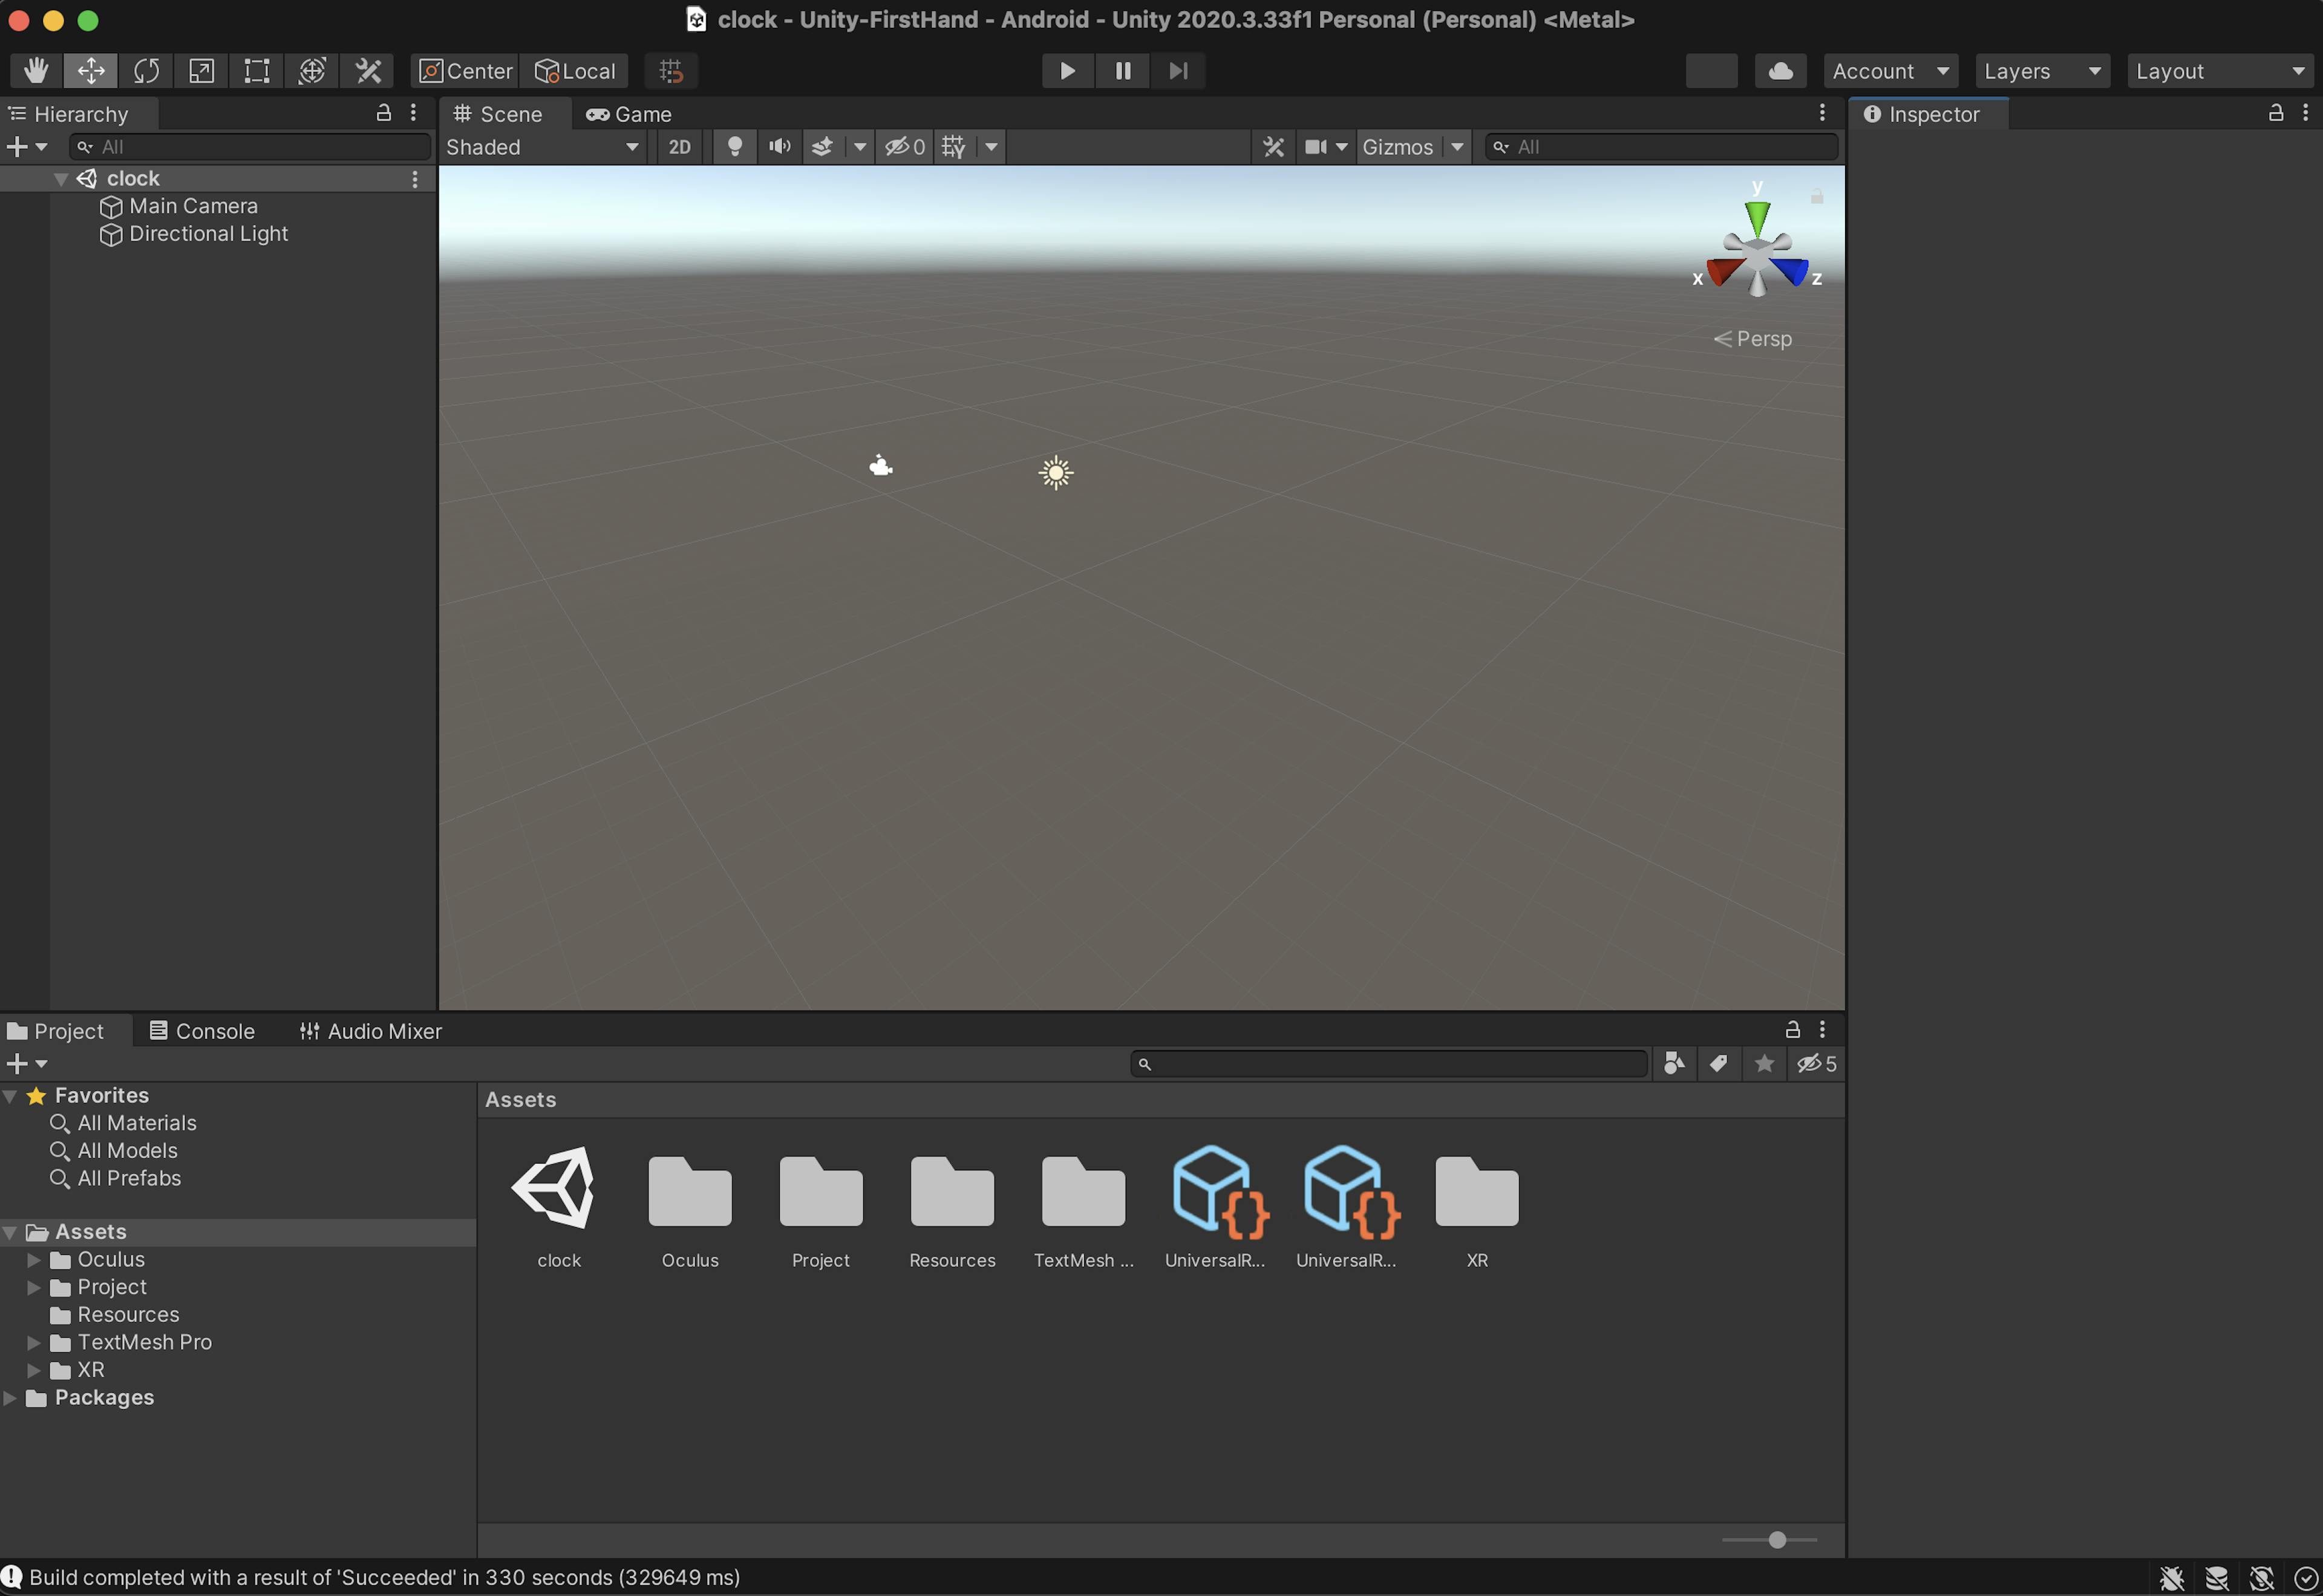 FirstHand en Unity Editor